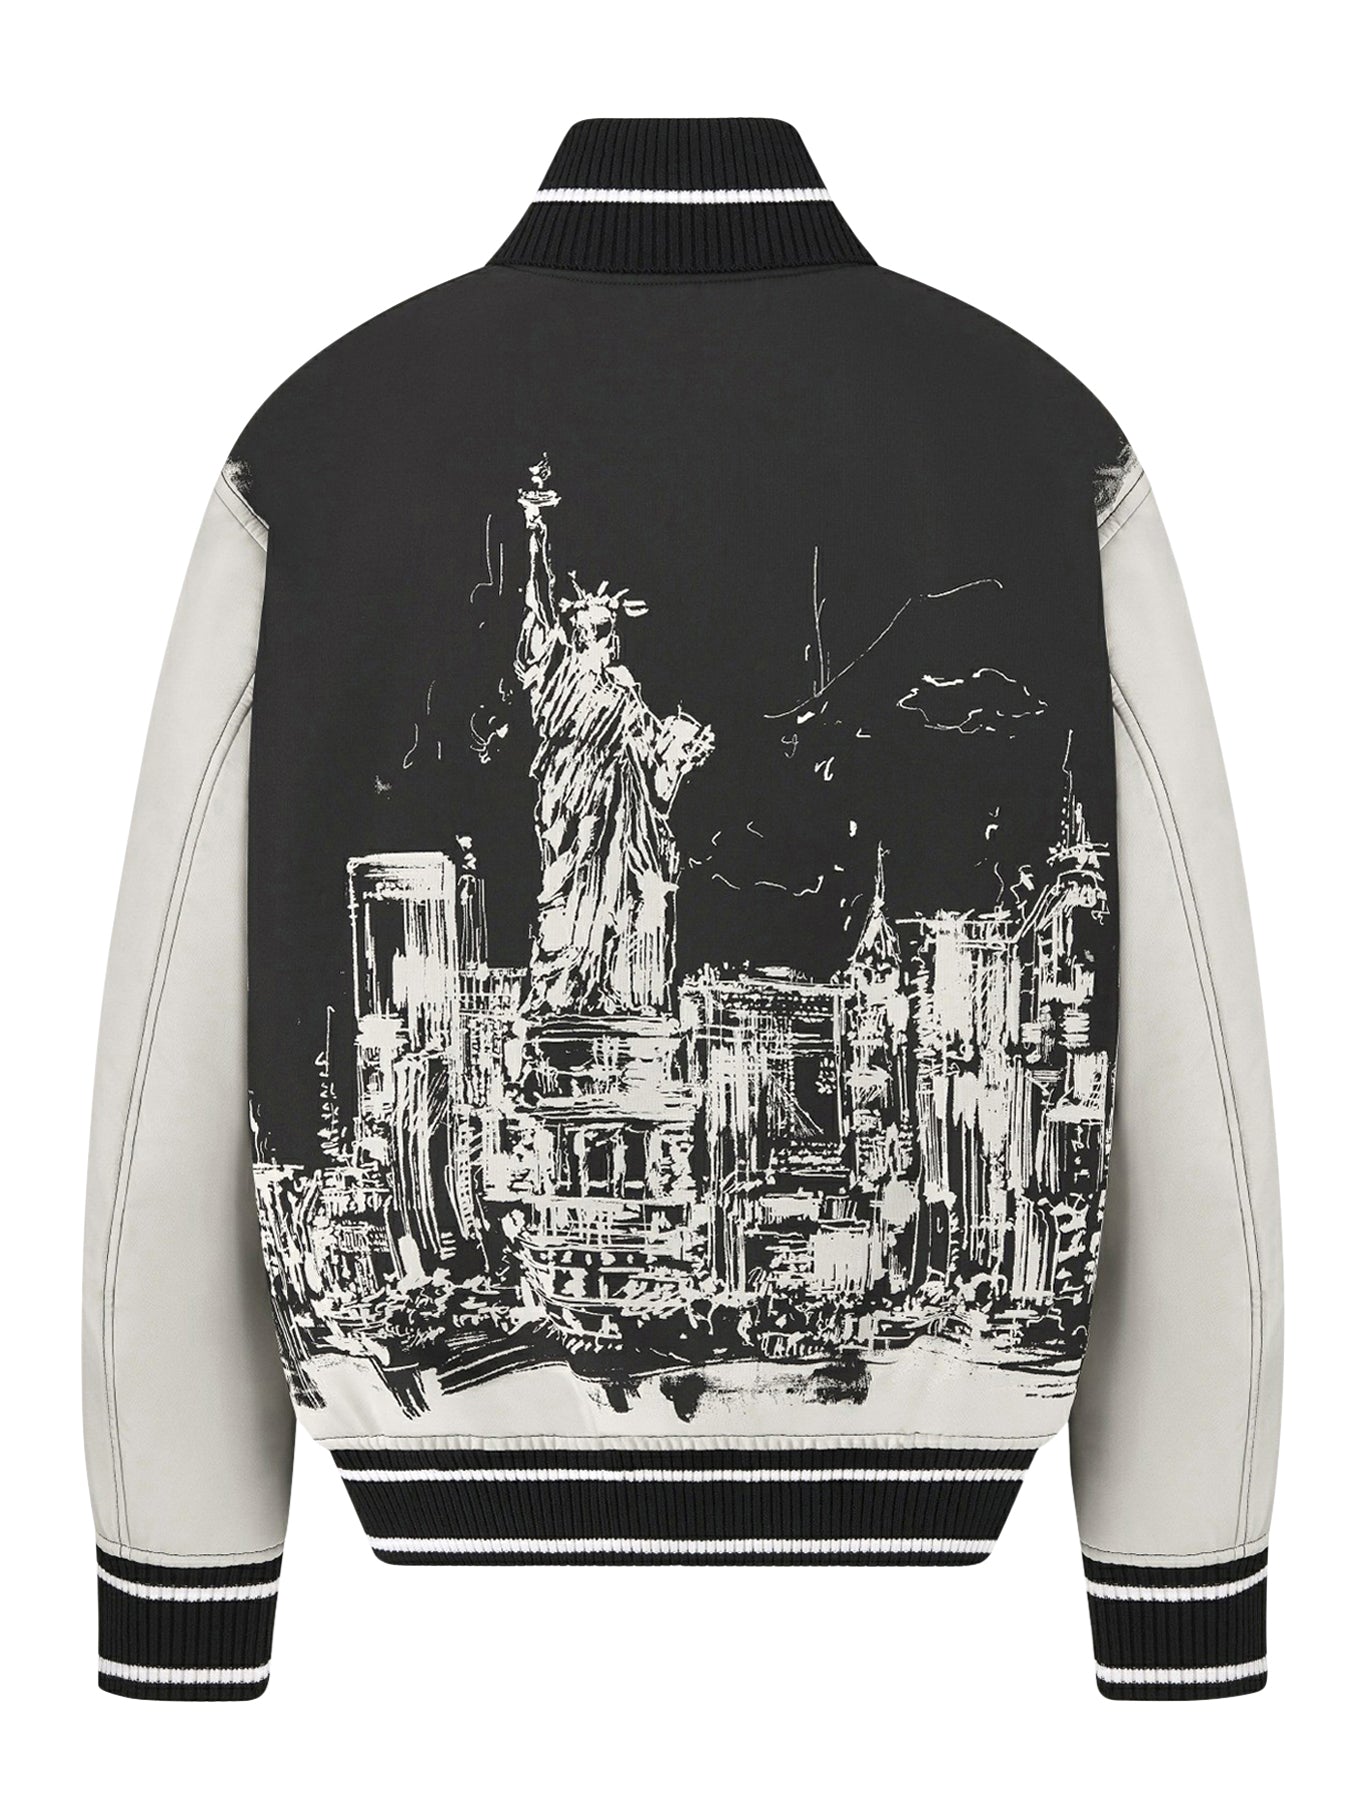 Bomber jacket in black and white technical taffeta jacquard with New York motif